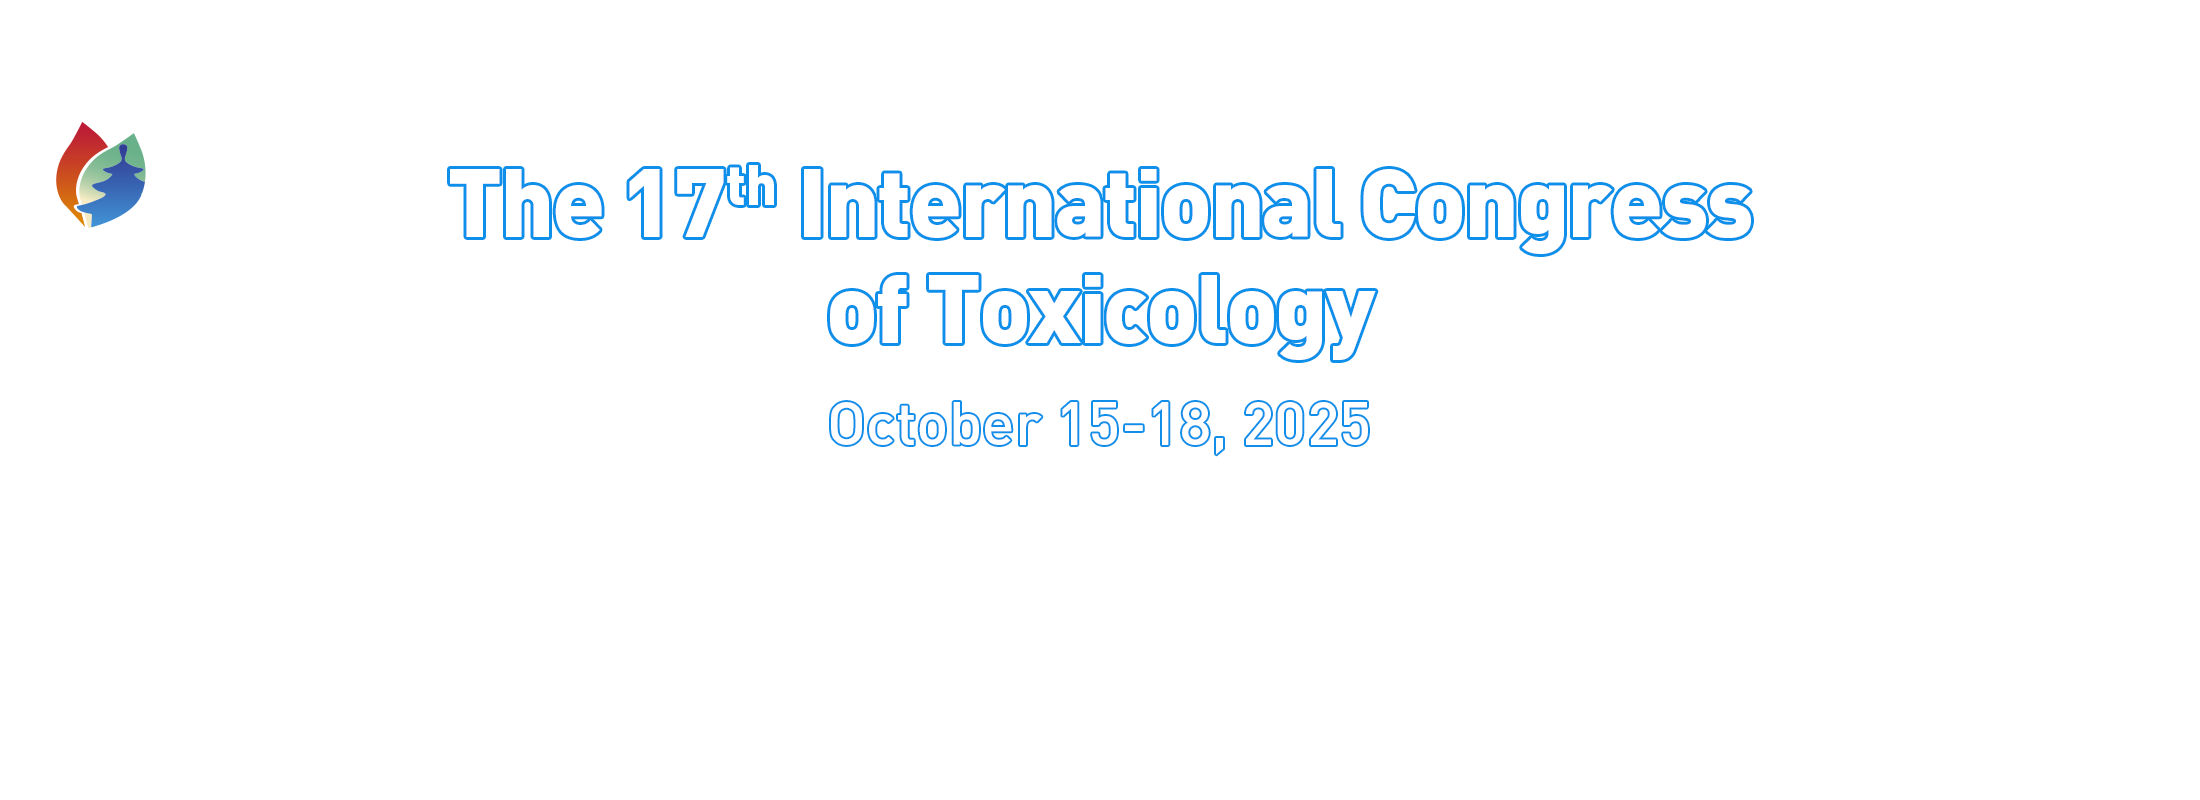 ICT 2025-The17th International Congress of Toxicology